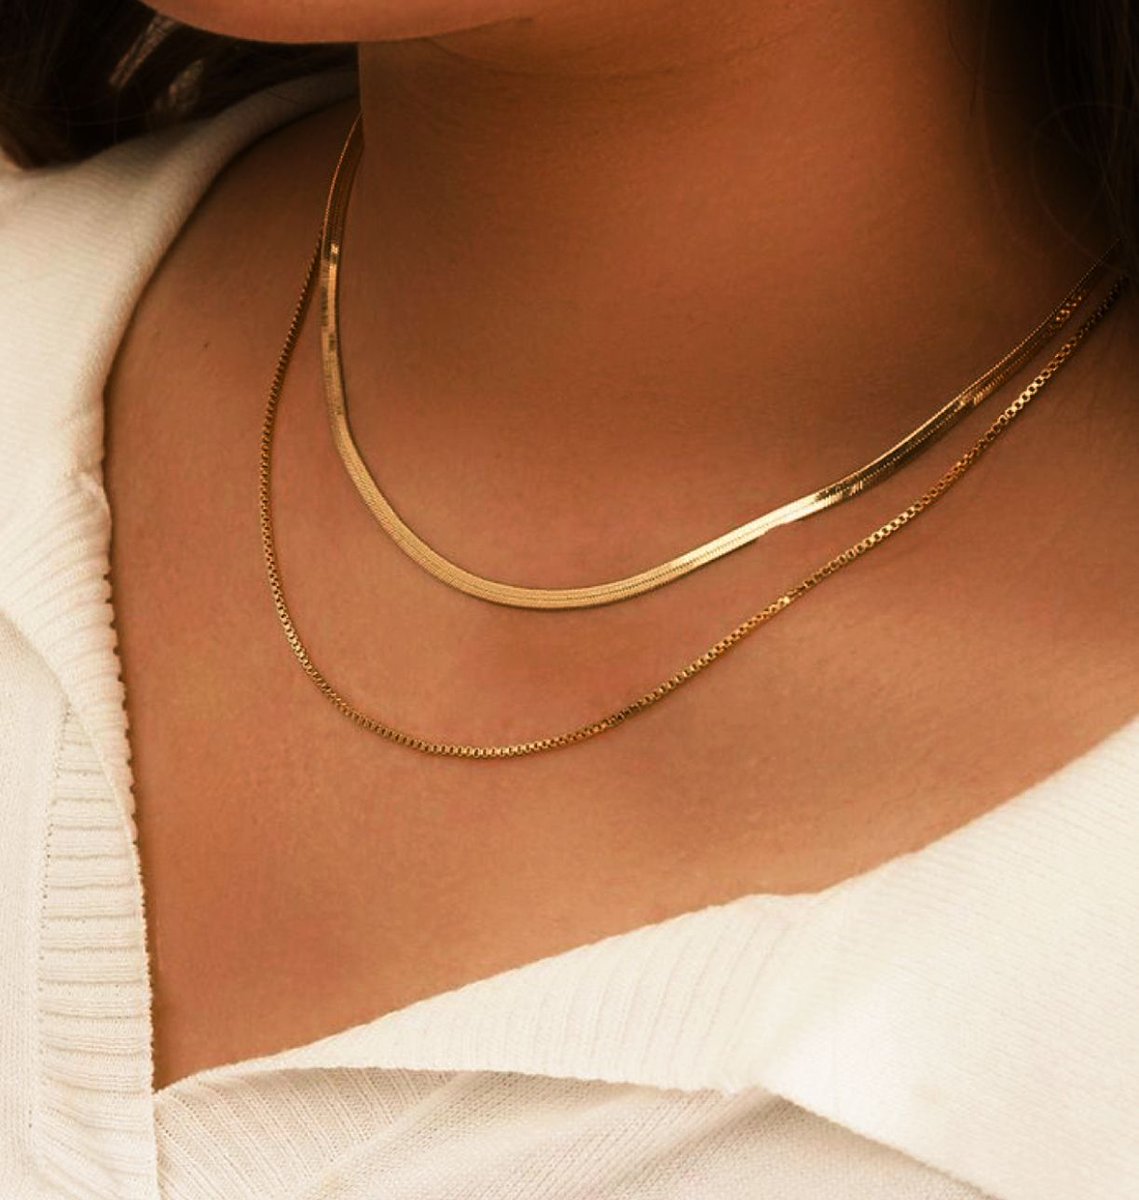 Gold jewelry is always in fashion!
Visit fourtruss.com 🔥

#goldchain #canadajewelry #jewelrycollection #goldnecklace #canadagold #canadaaction #cubanlinkchain #tennischain #ropechain #goldnecklase #chain #boldchain #goldcrossnecklase #14kgoldchain #herringbonechain